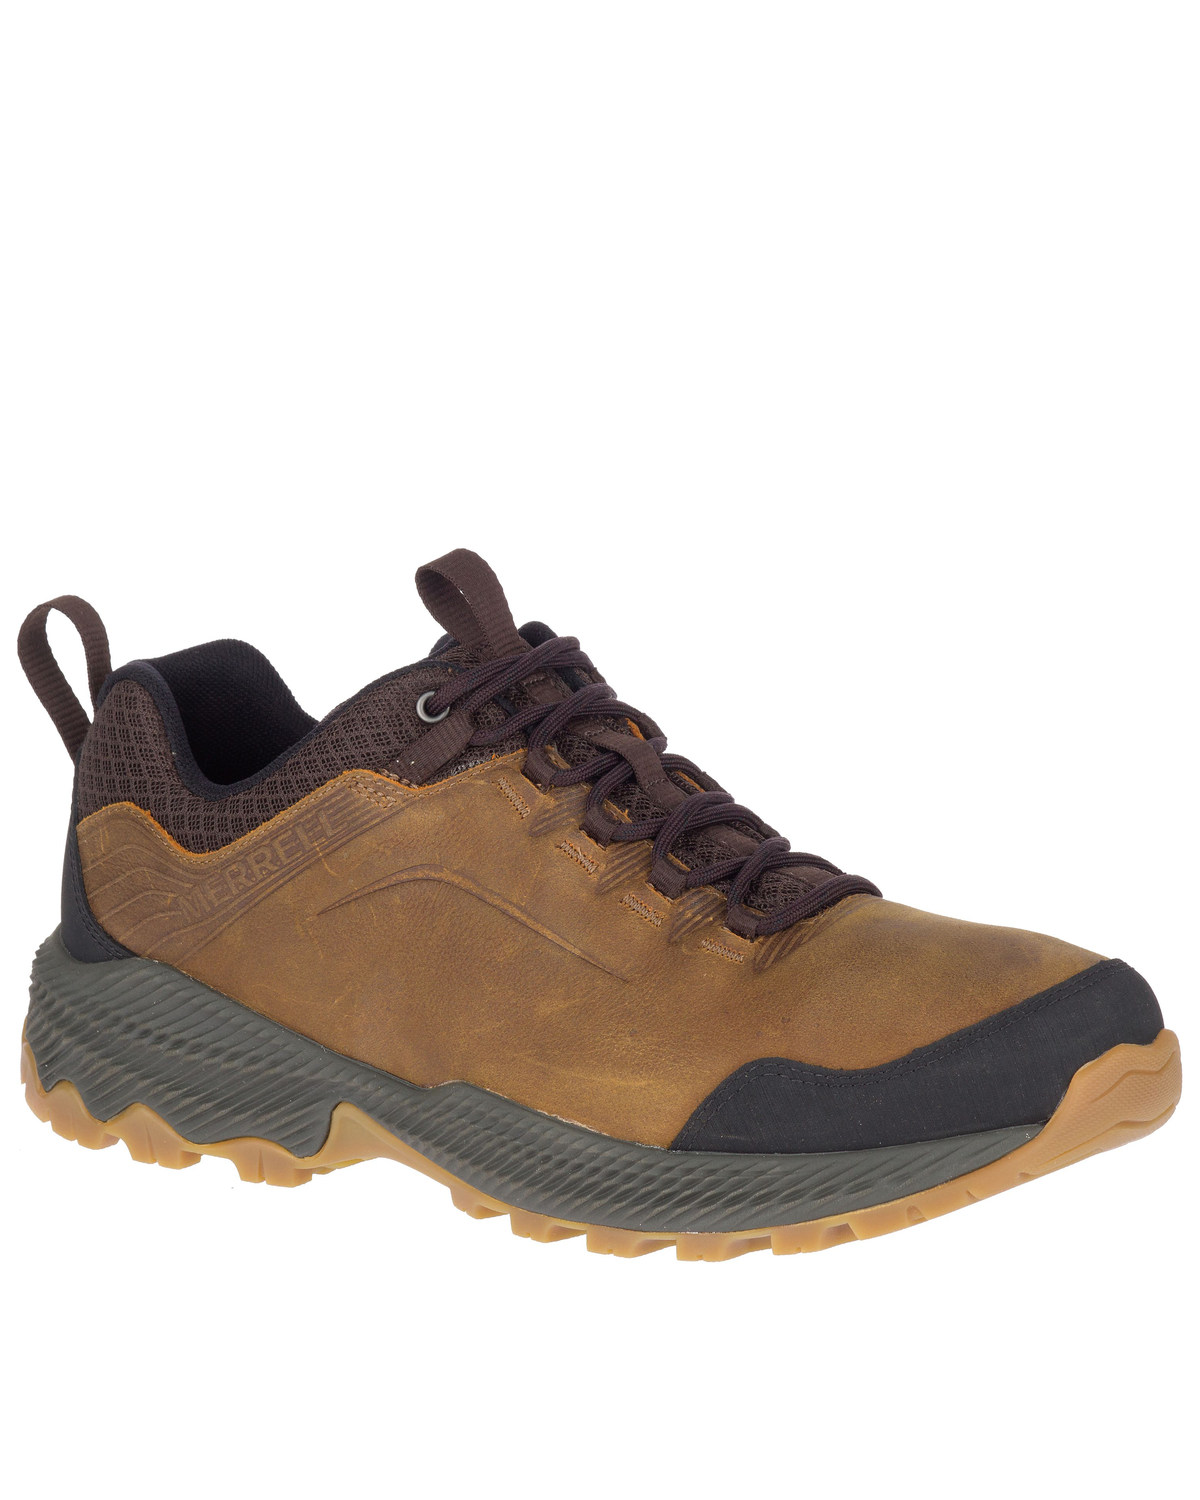 Merrell Men's Forestbound Waterproof Hiking Boots - Soft Toe | Boot Barn